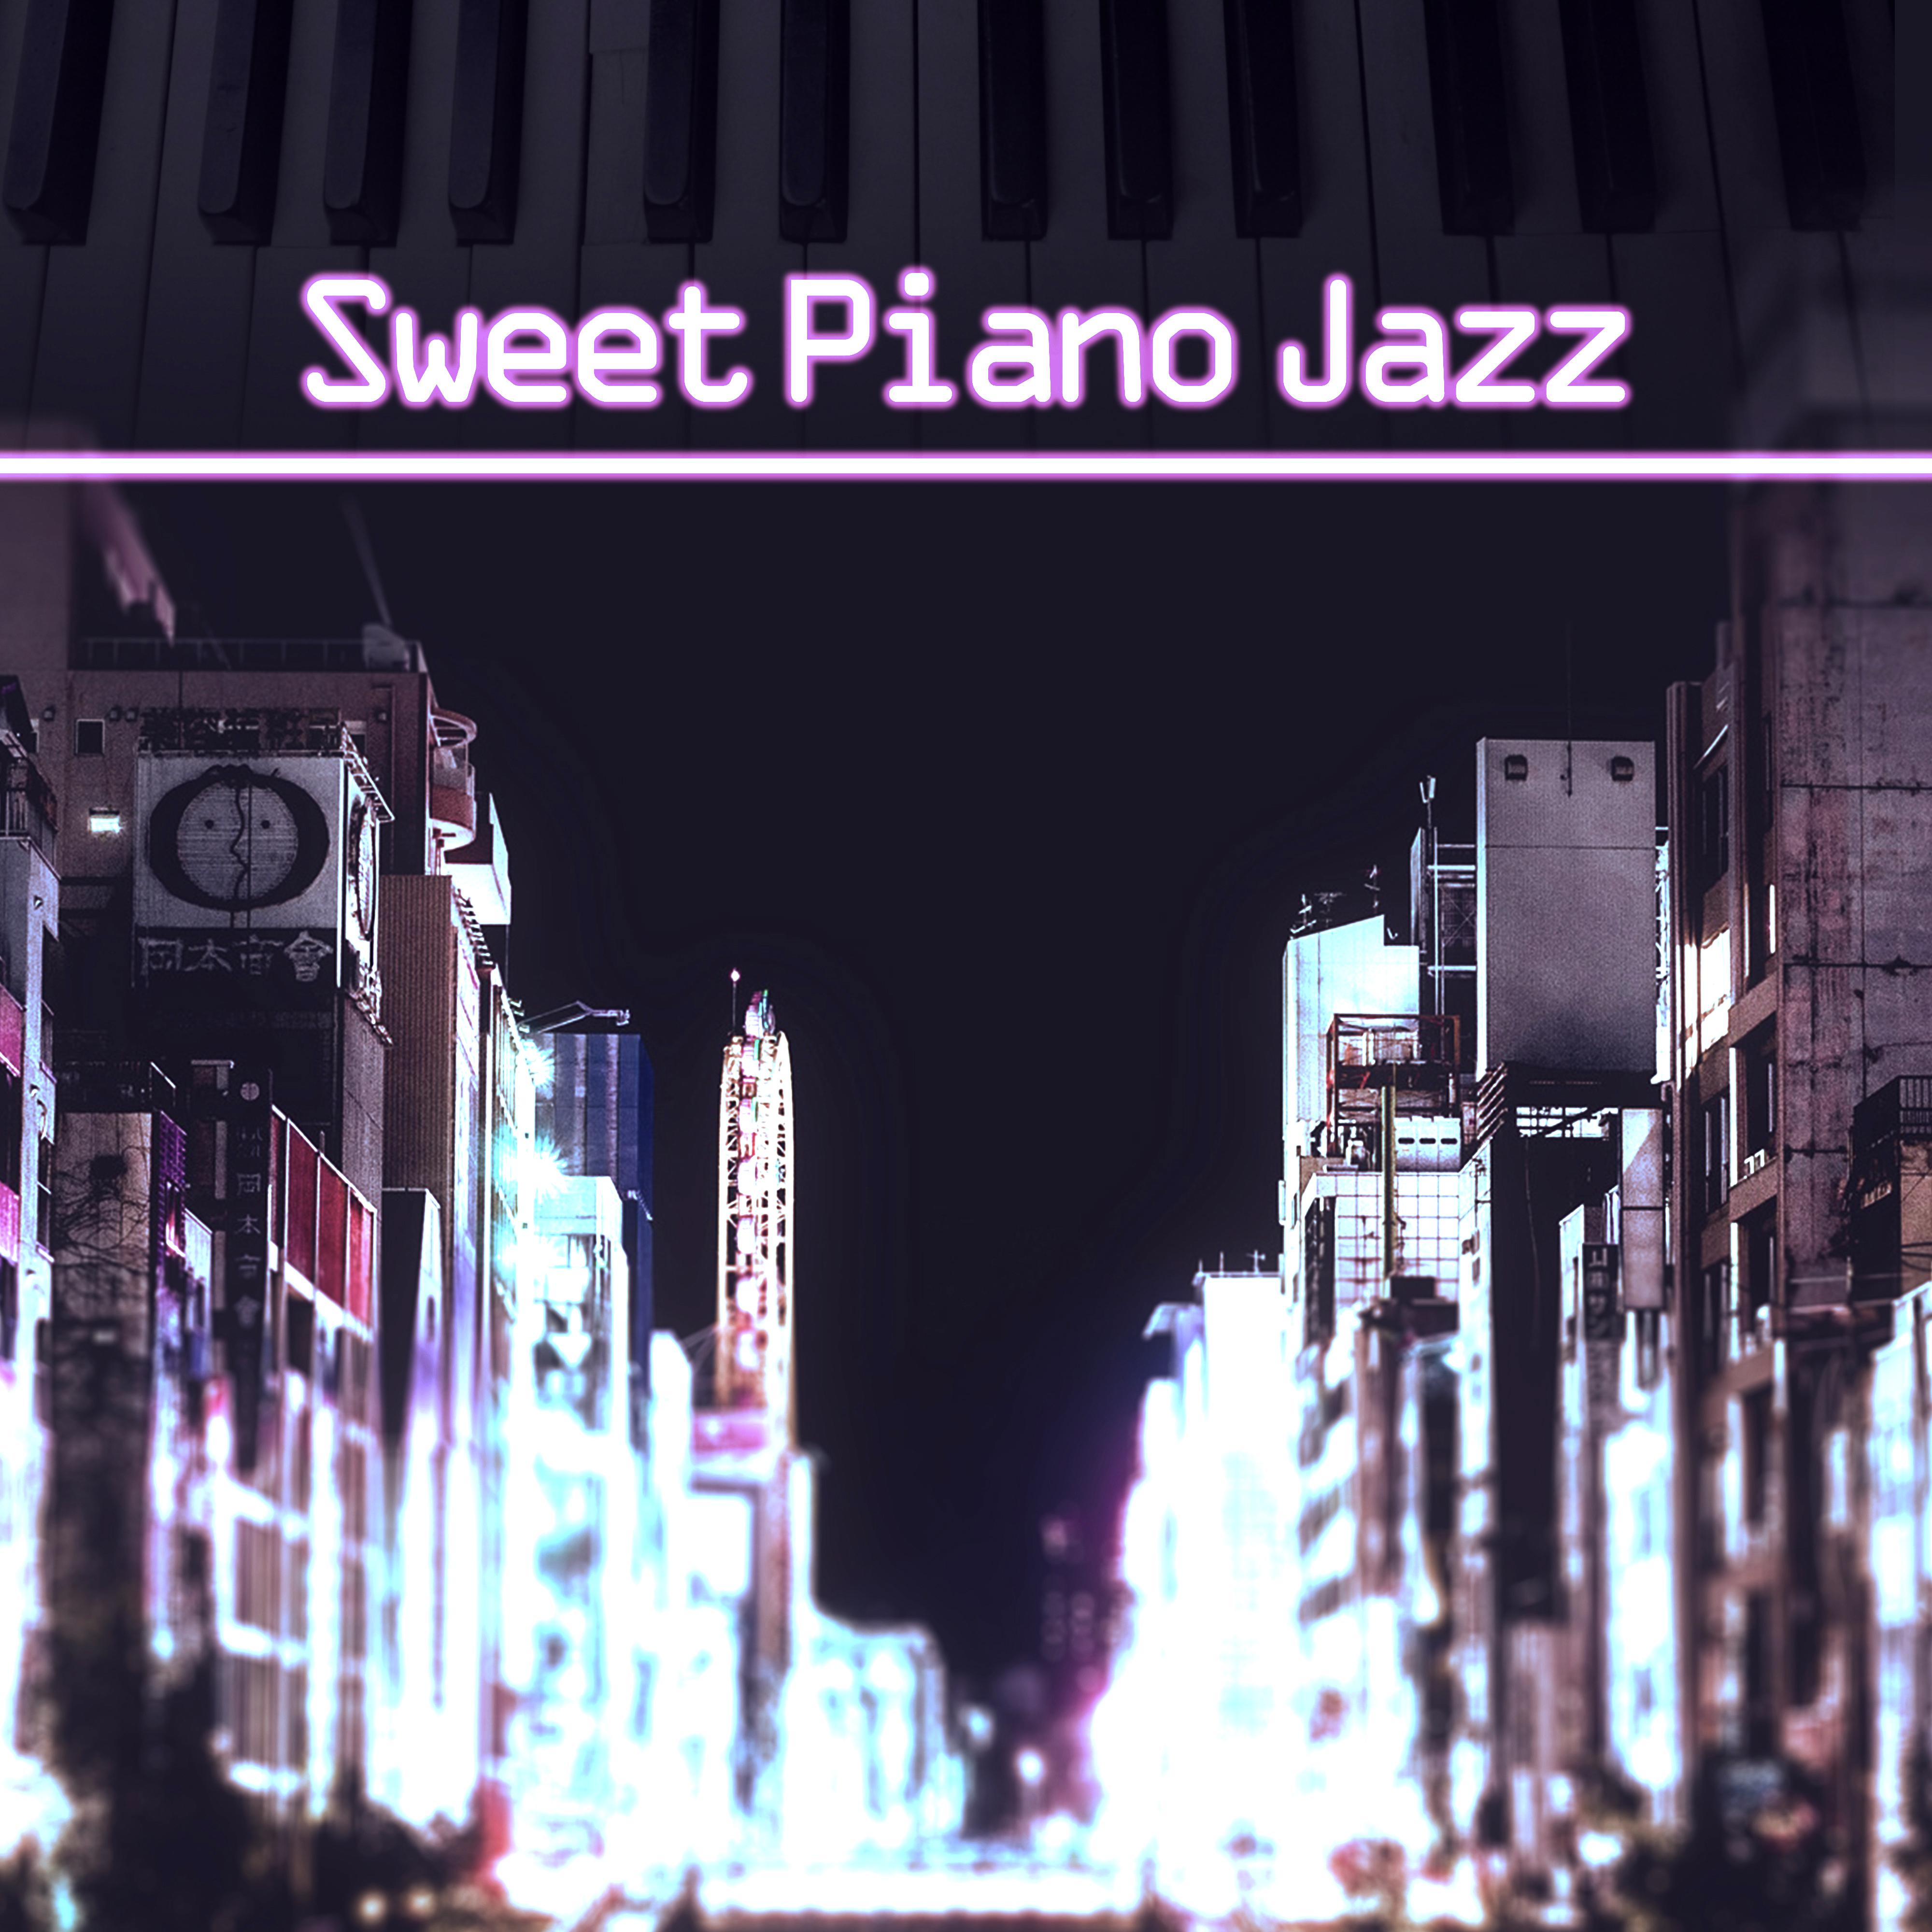 Sweet Piano Jazz – Soft & Calm Jazz, Music to Relax, Time for Break, Soothing Piano Waves